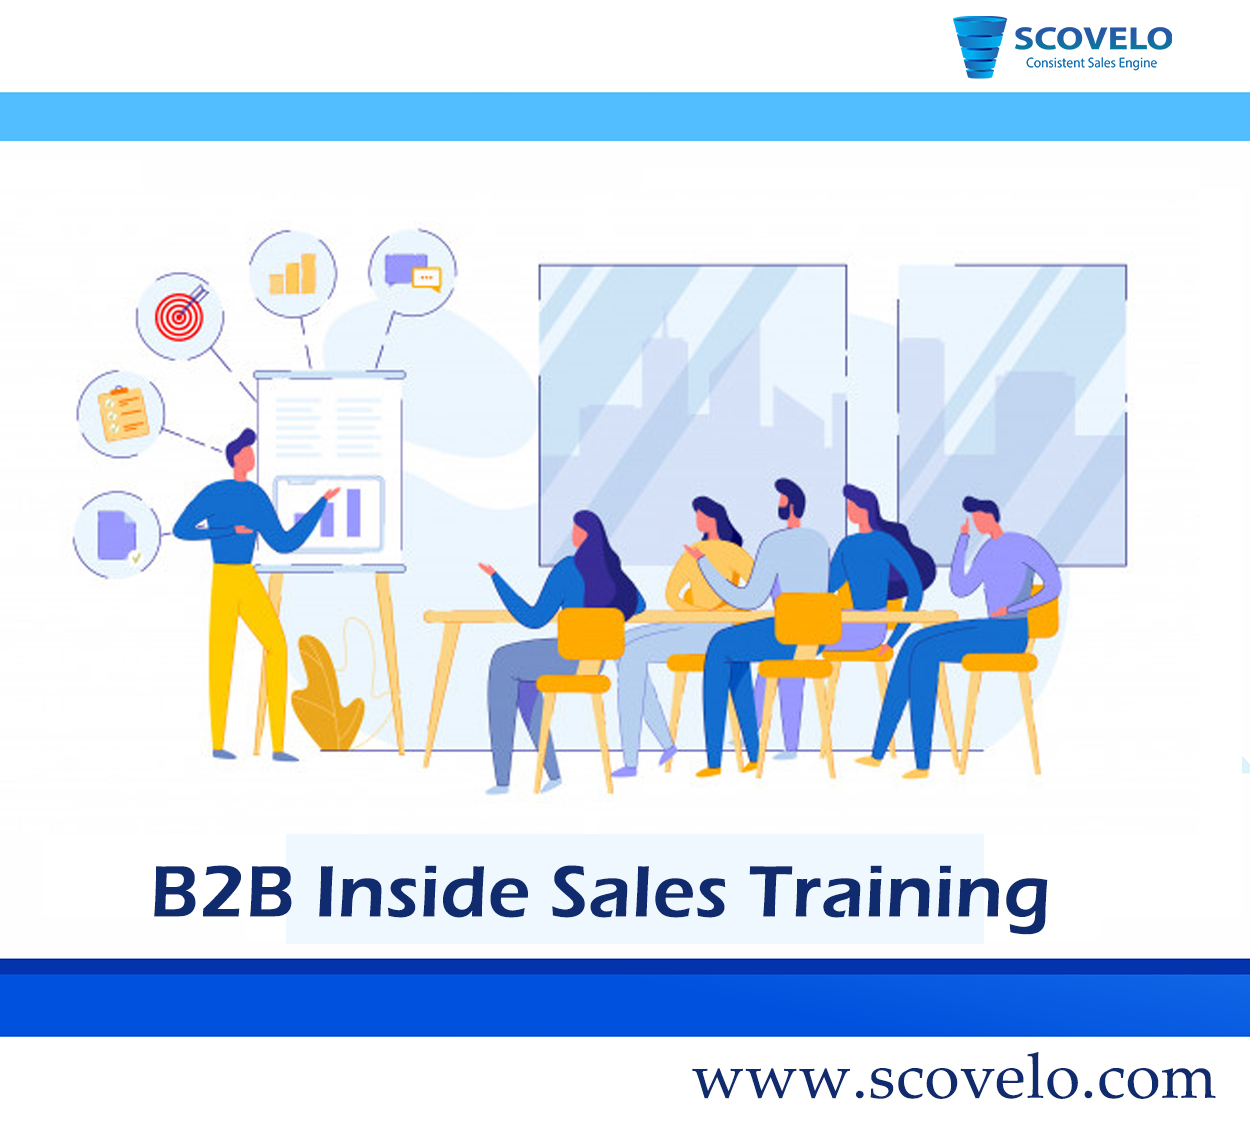 Inside Sales TrainingServicesBusiness OffersAll Indiaother